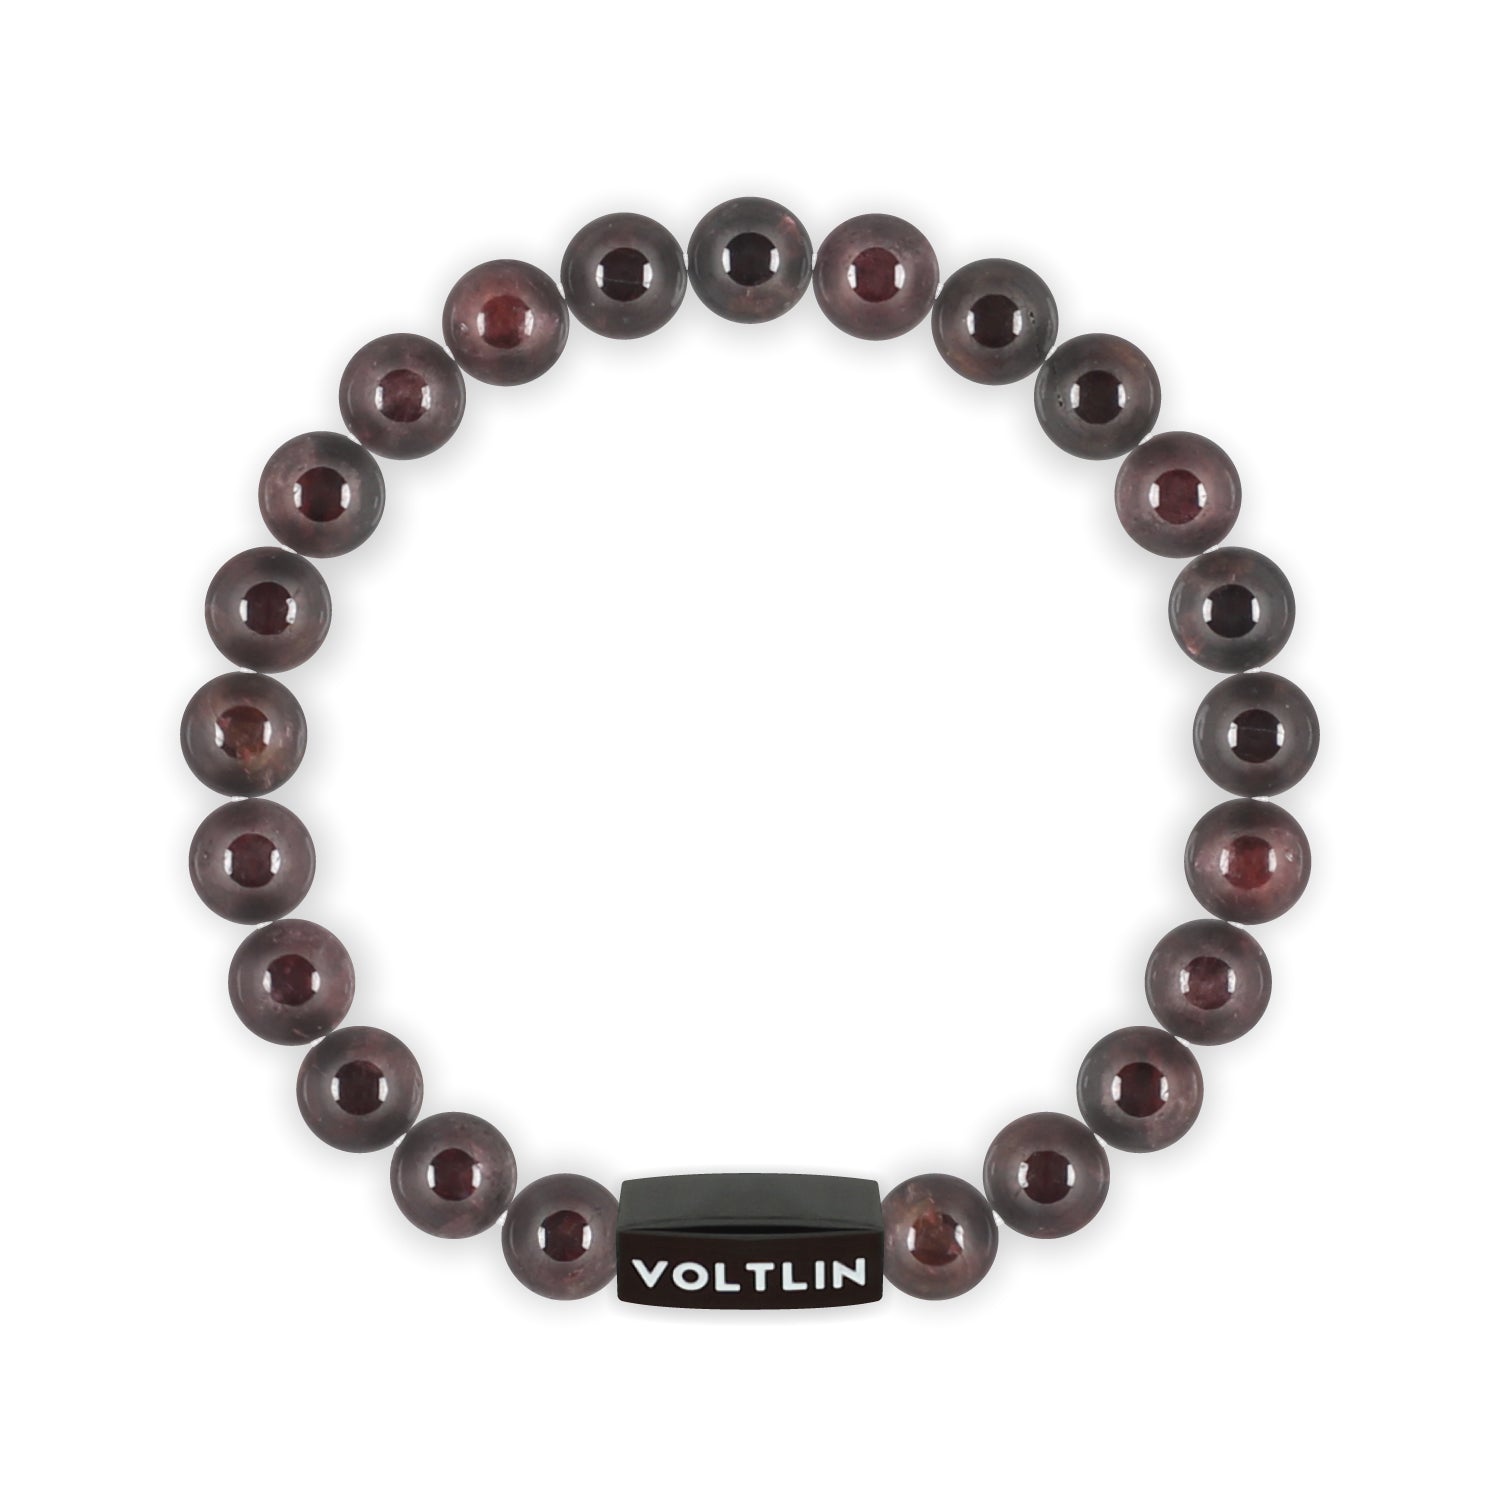 Front view of an 8mm Smooth Garnet crystal beaded stretch bracelet with black stainless steel logo bead made by Voltlin